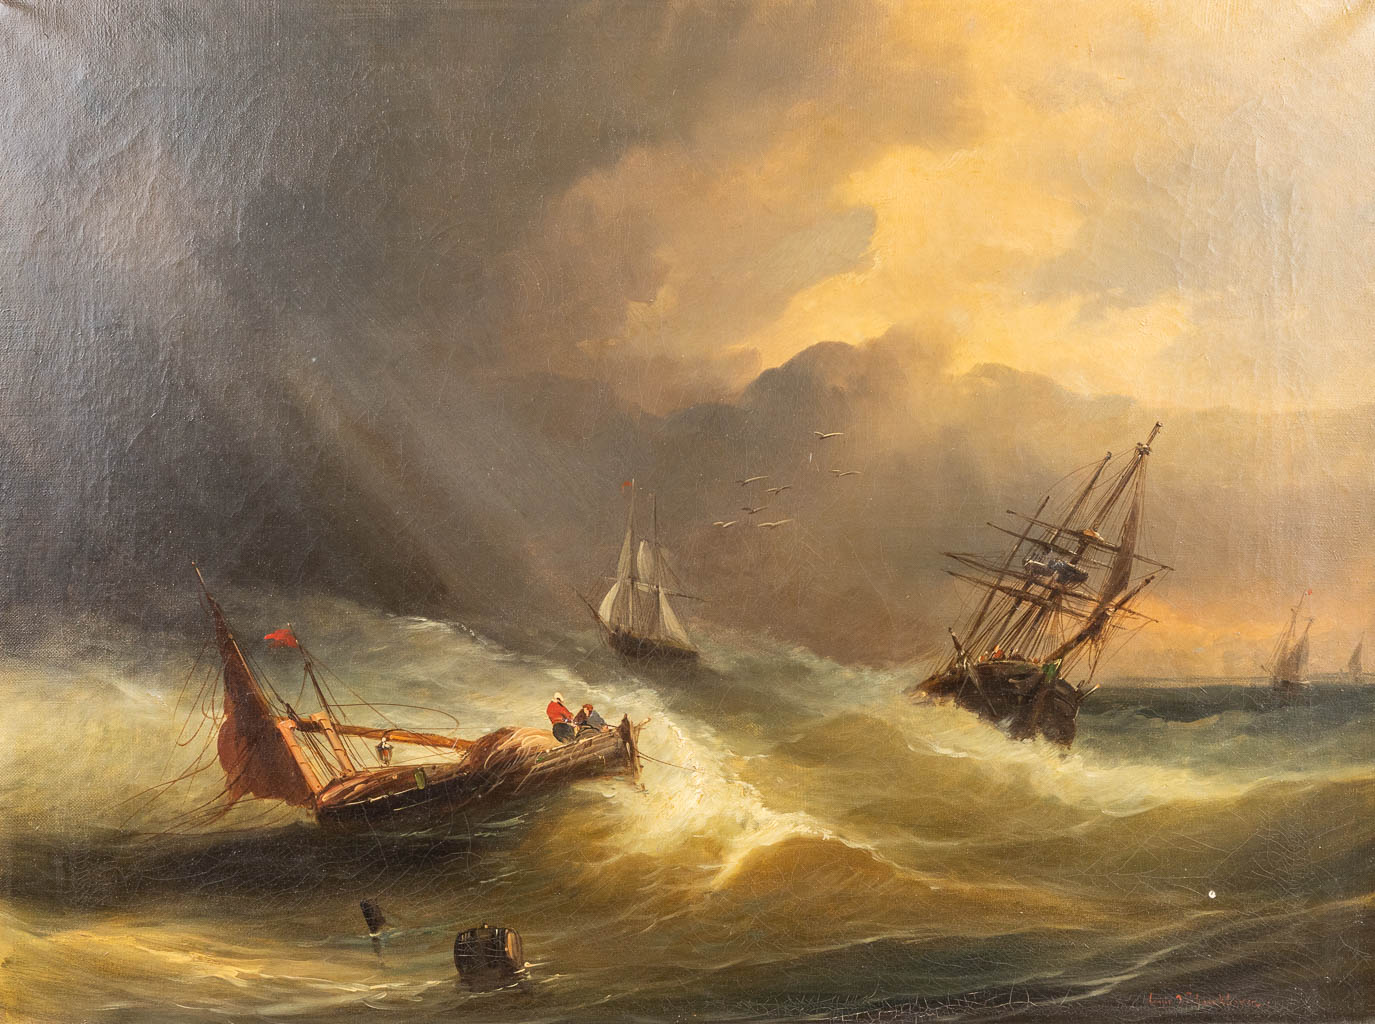 Louis I VERBOECKHOVEN (1802-1889) 'Storm at sea', oil on canvas. (W:63 x H:48 cm)